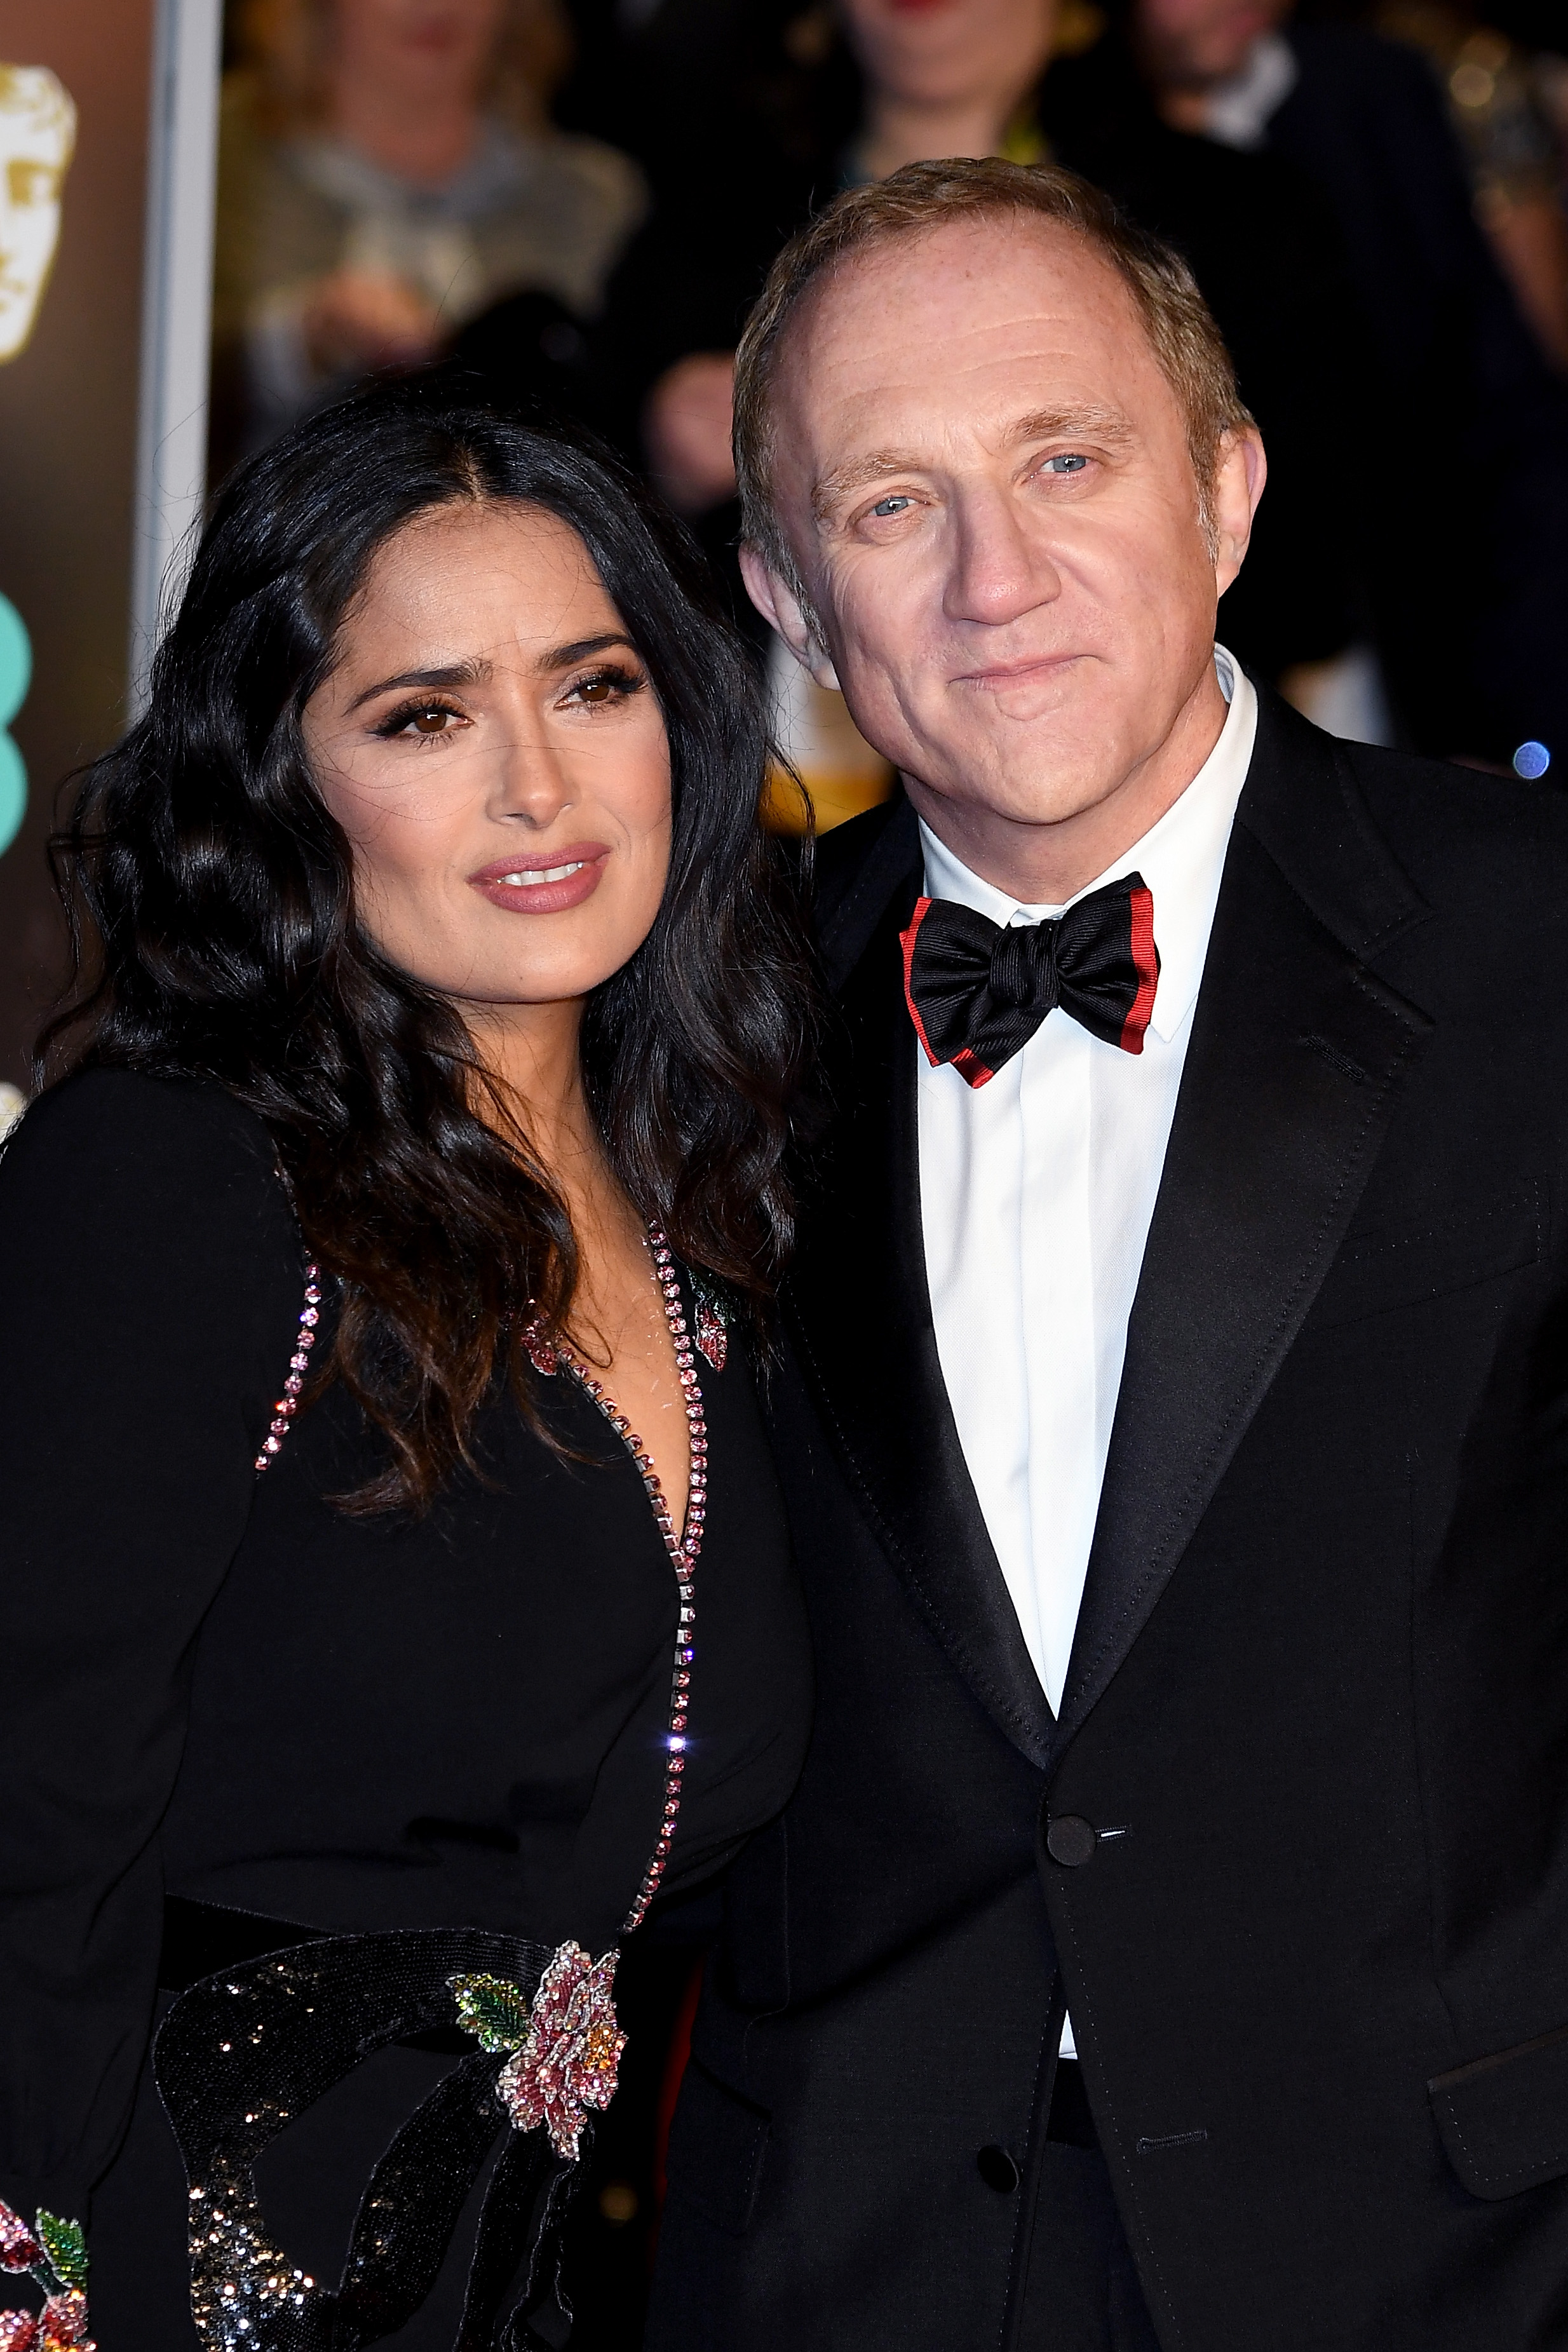 Salma Hayek and husband Francois-Henri Pinault attend the EE British Academy Film Awards (BAFTA) held at Royal Albert Hall on February 18, 2018 in London, England | Source: Getty Images